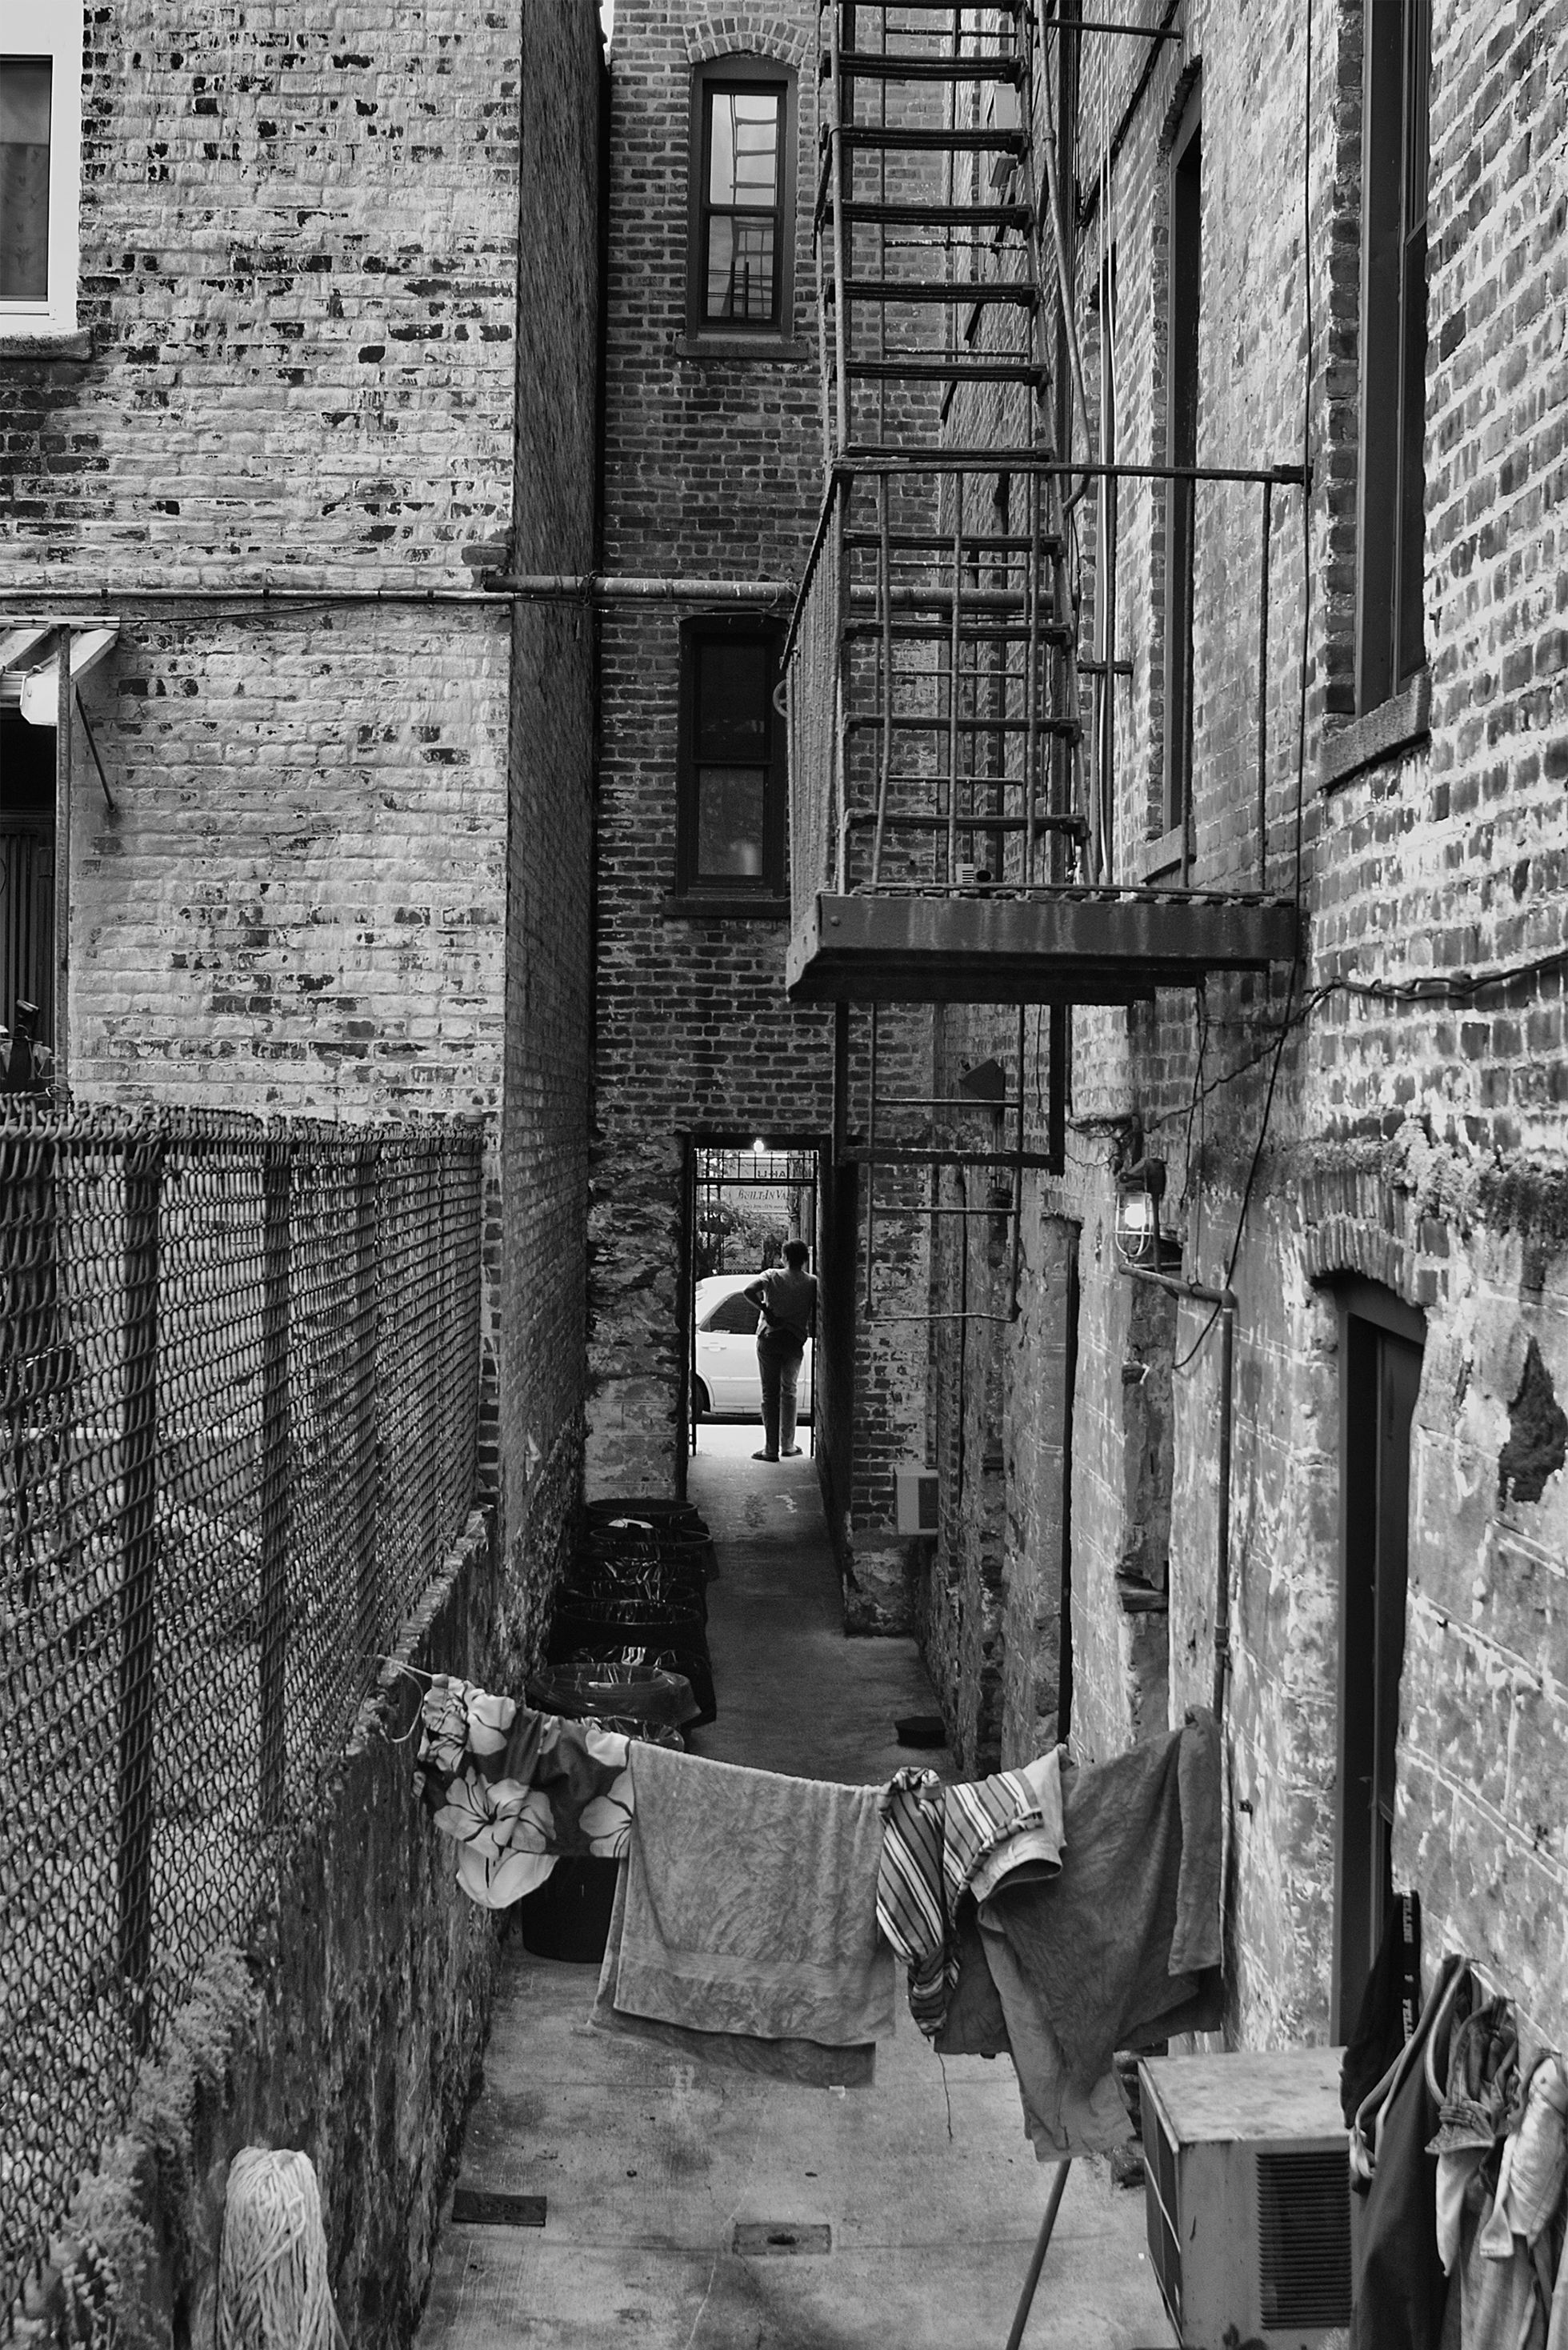 The alleyway between adjacent brick buildings in the city. Clothes and towels hang on a clothesline between the buildings.